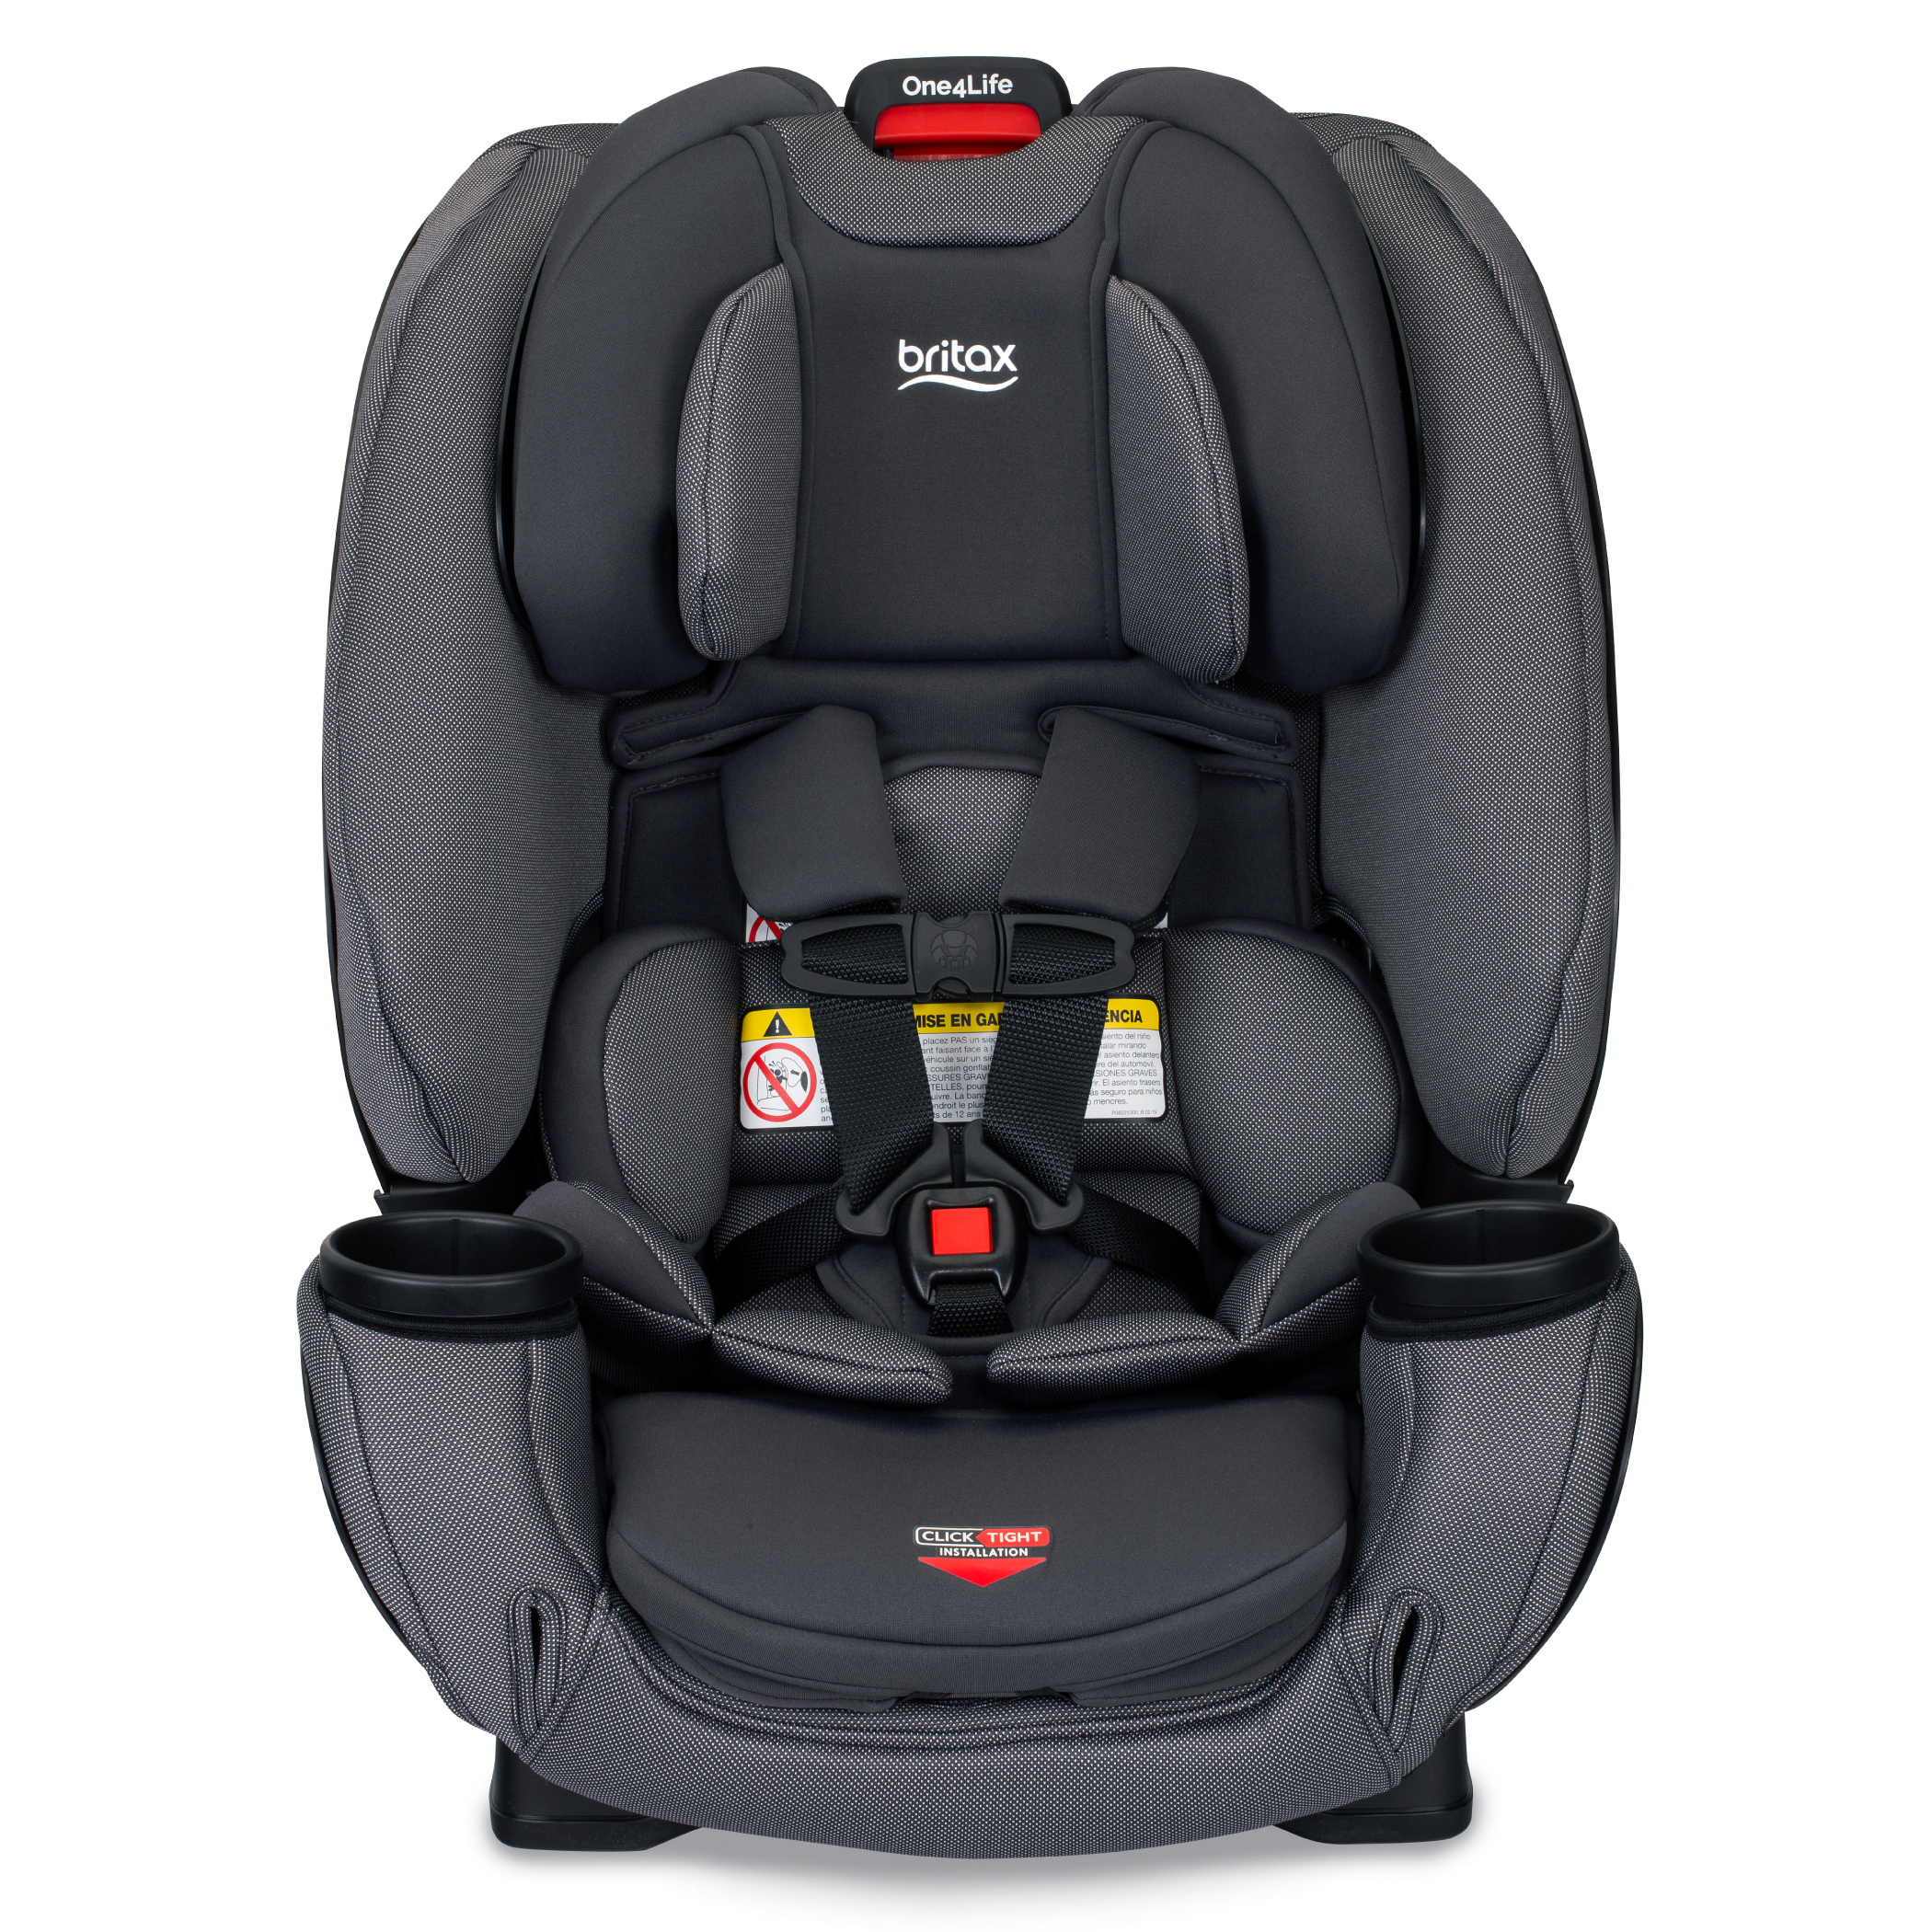 Britax One4Life ClickTight All-in-One Car Seat, Drift - image 2 of 14